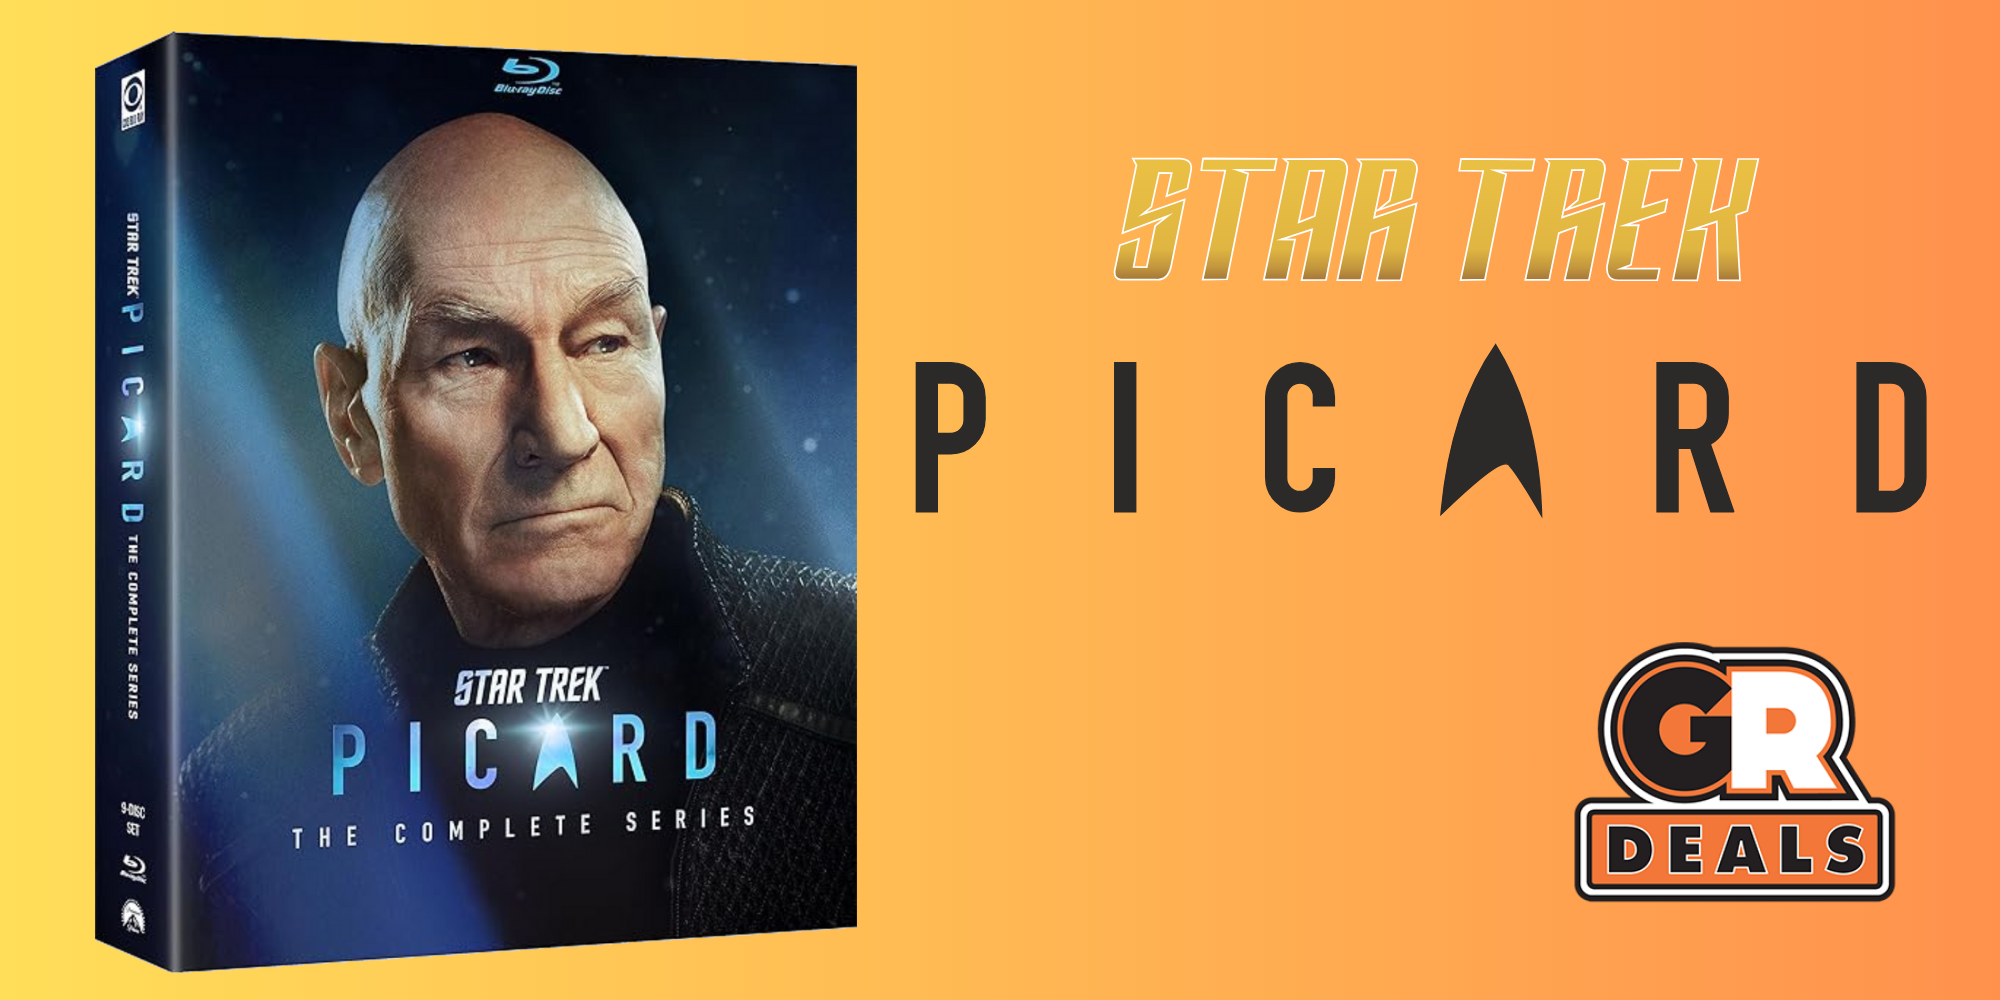 Picard feature image on blu-ray